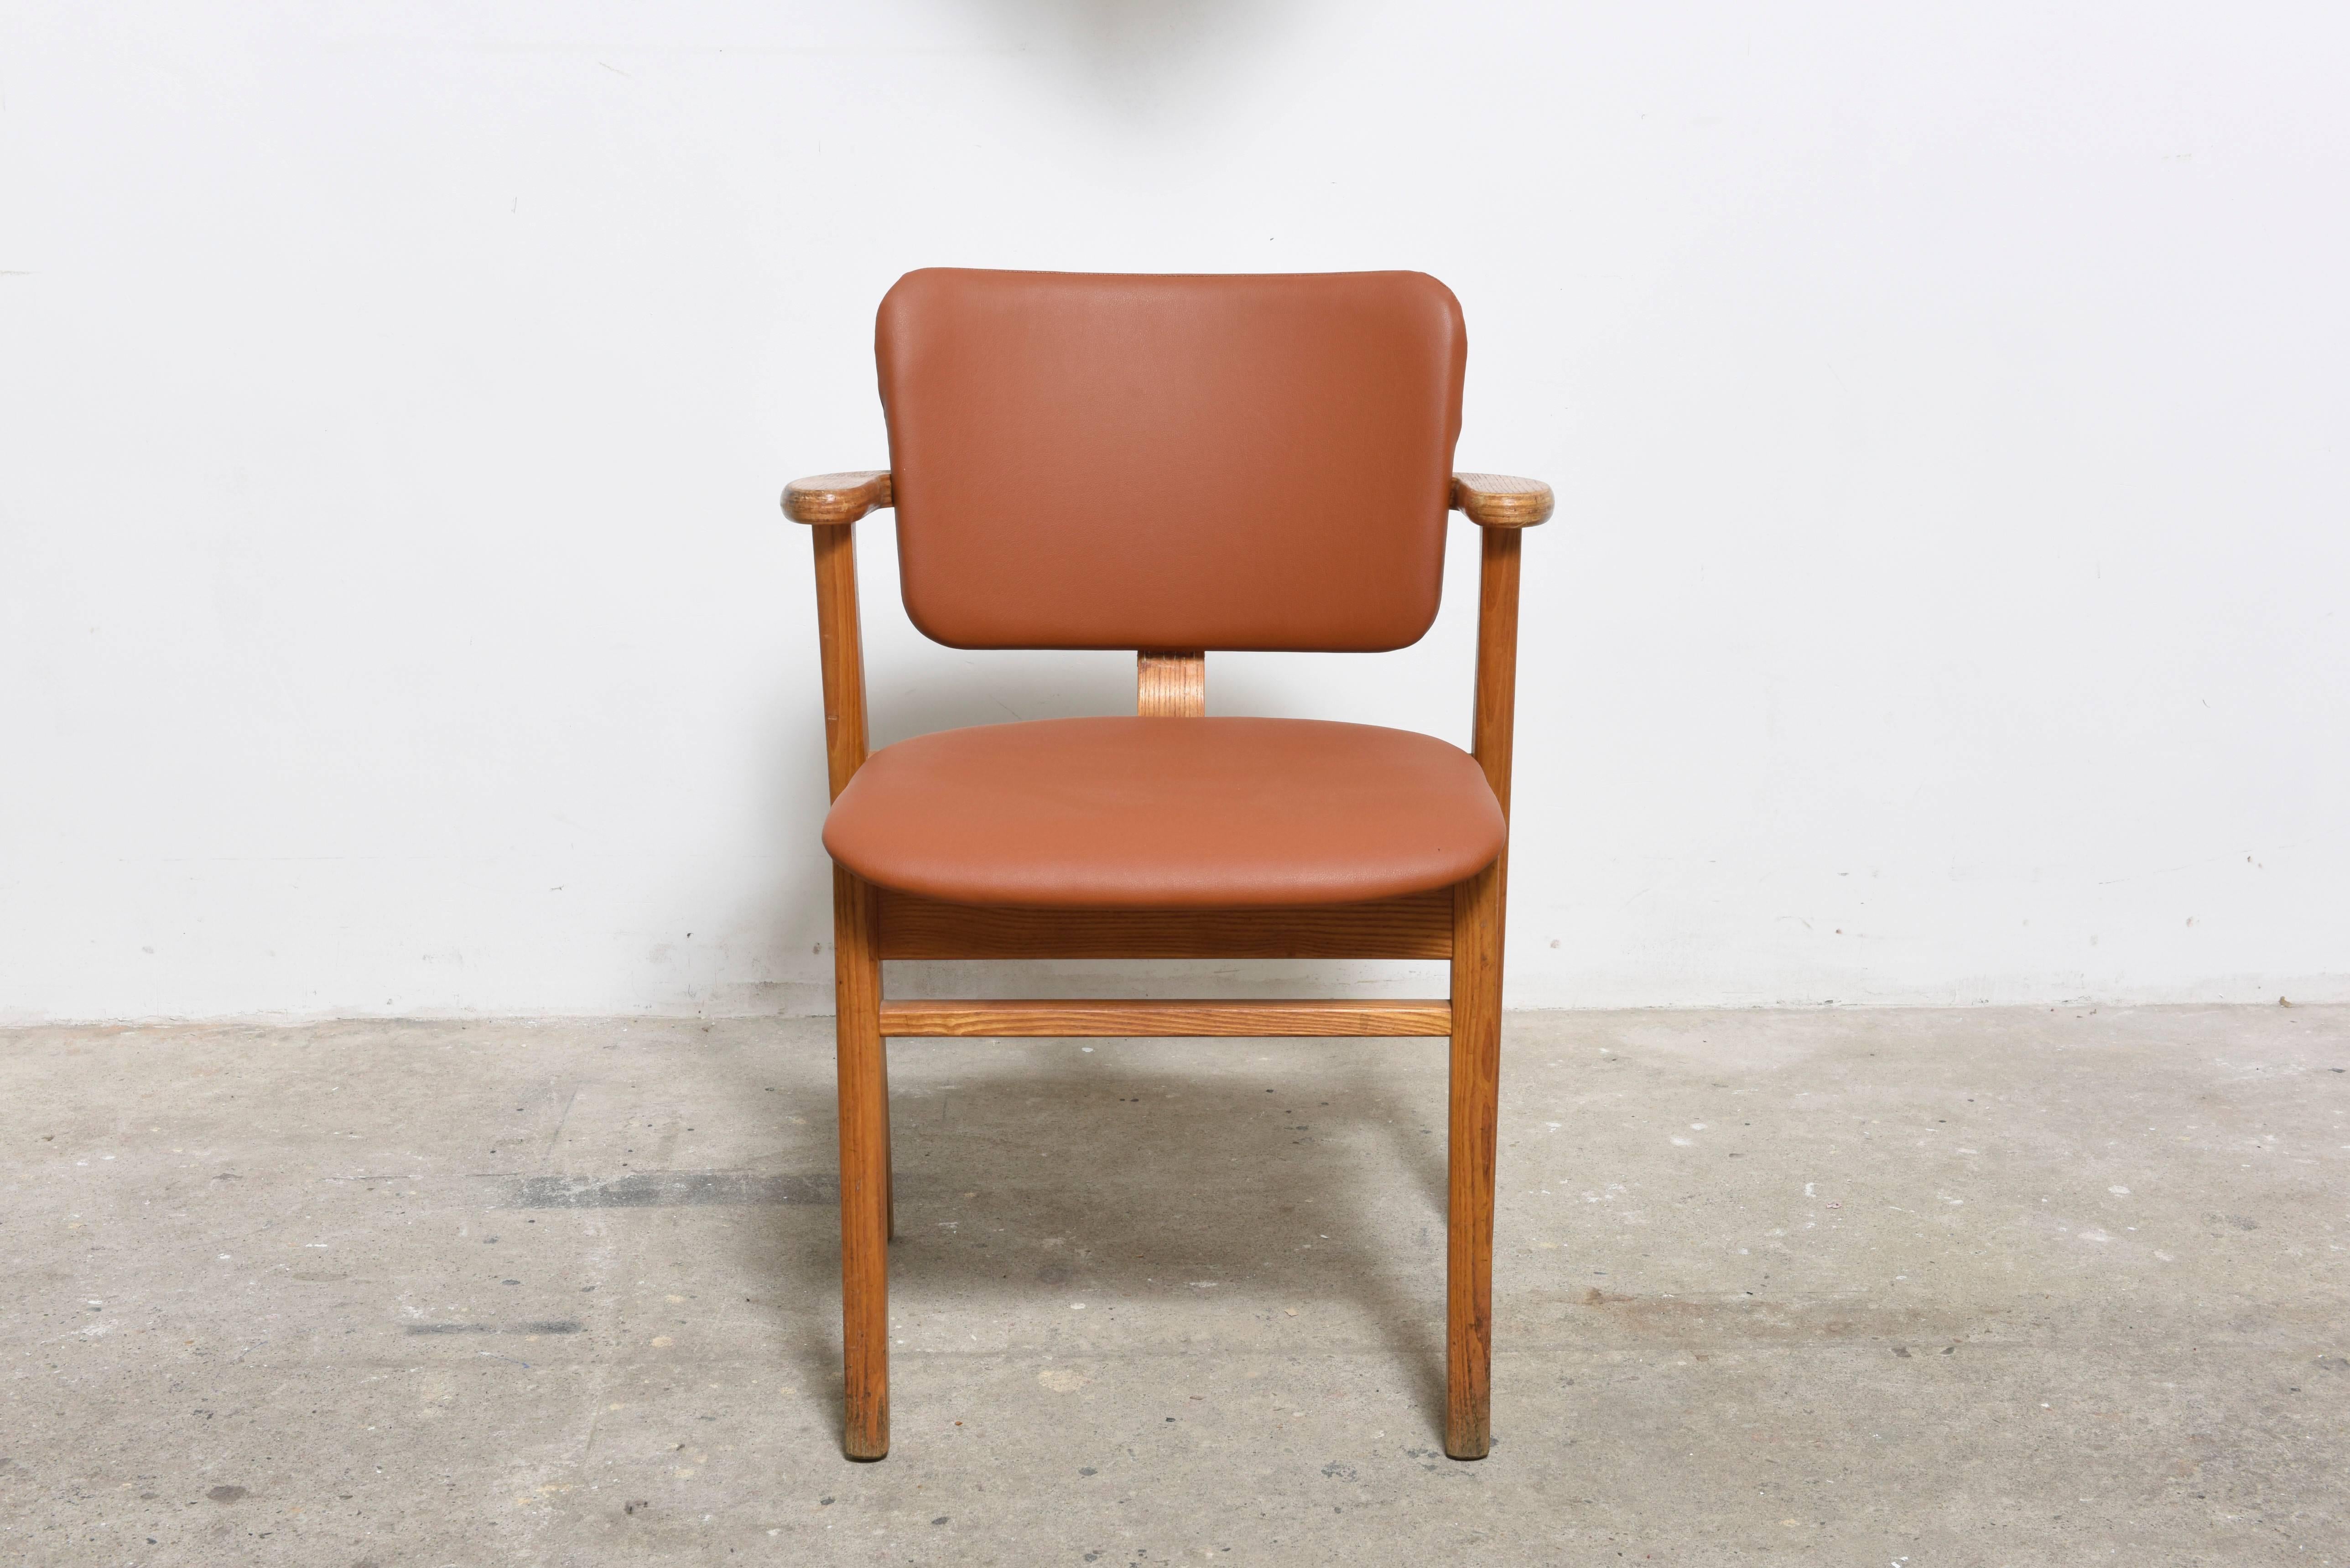 Set of three wooden chairs designed by Ilmari Tapiovaara, produced in 1953 by Keravan Puuteollisuus of Finland for U.S. distribution by Knoll. 

The seat is re-upholstered in camel leather, frame and armrests of solid birch.